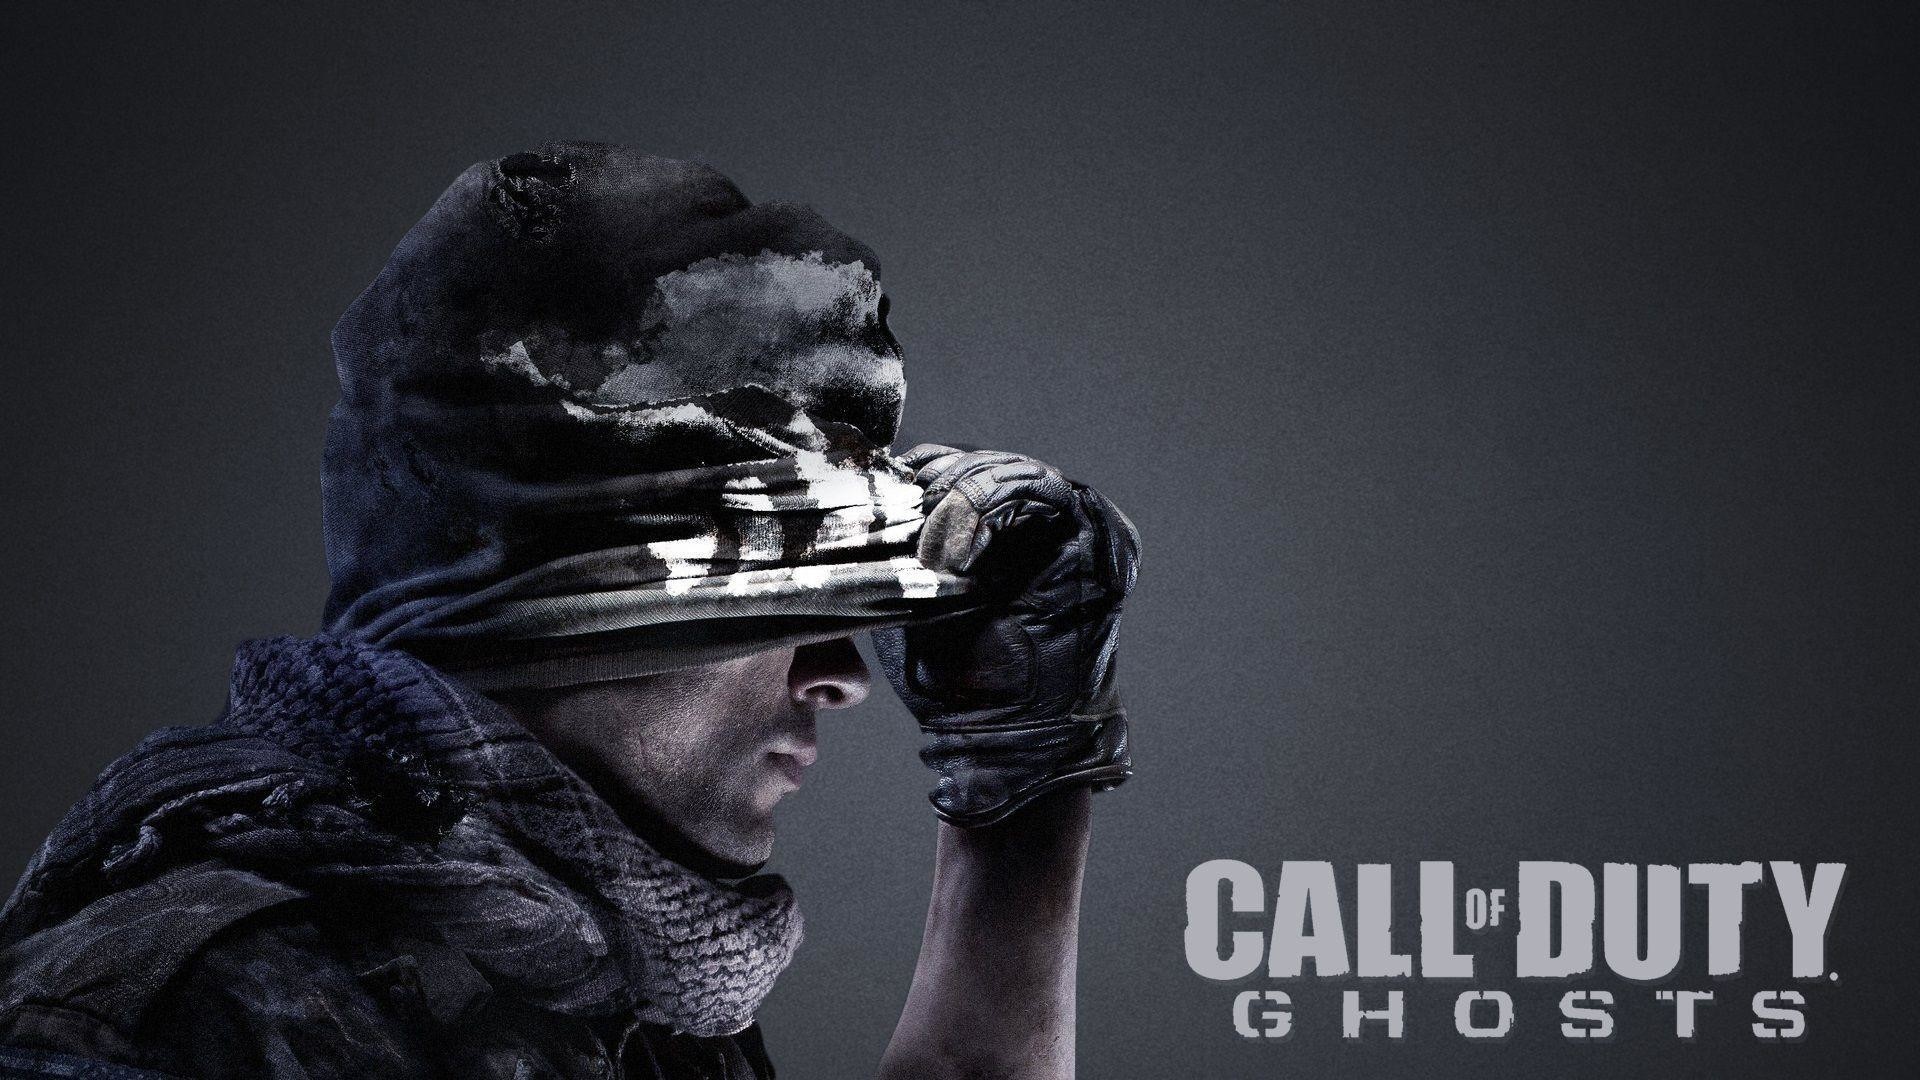 1920x1080 Call Of Duty Ghosts 1080p #101 Wallpaper | All Best Image Collection